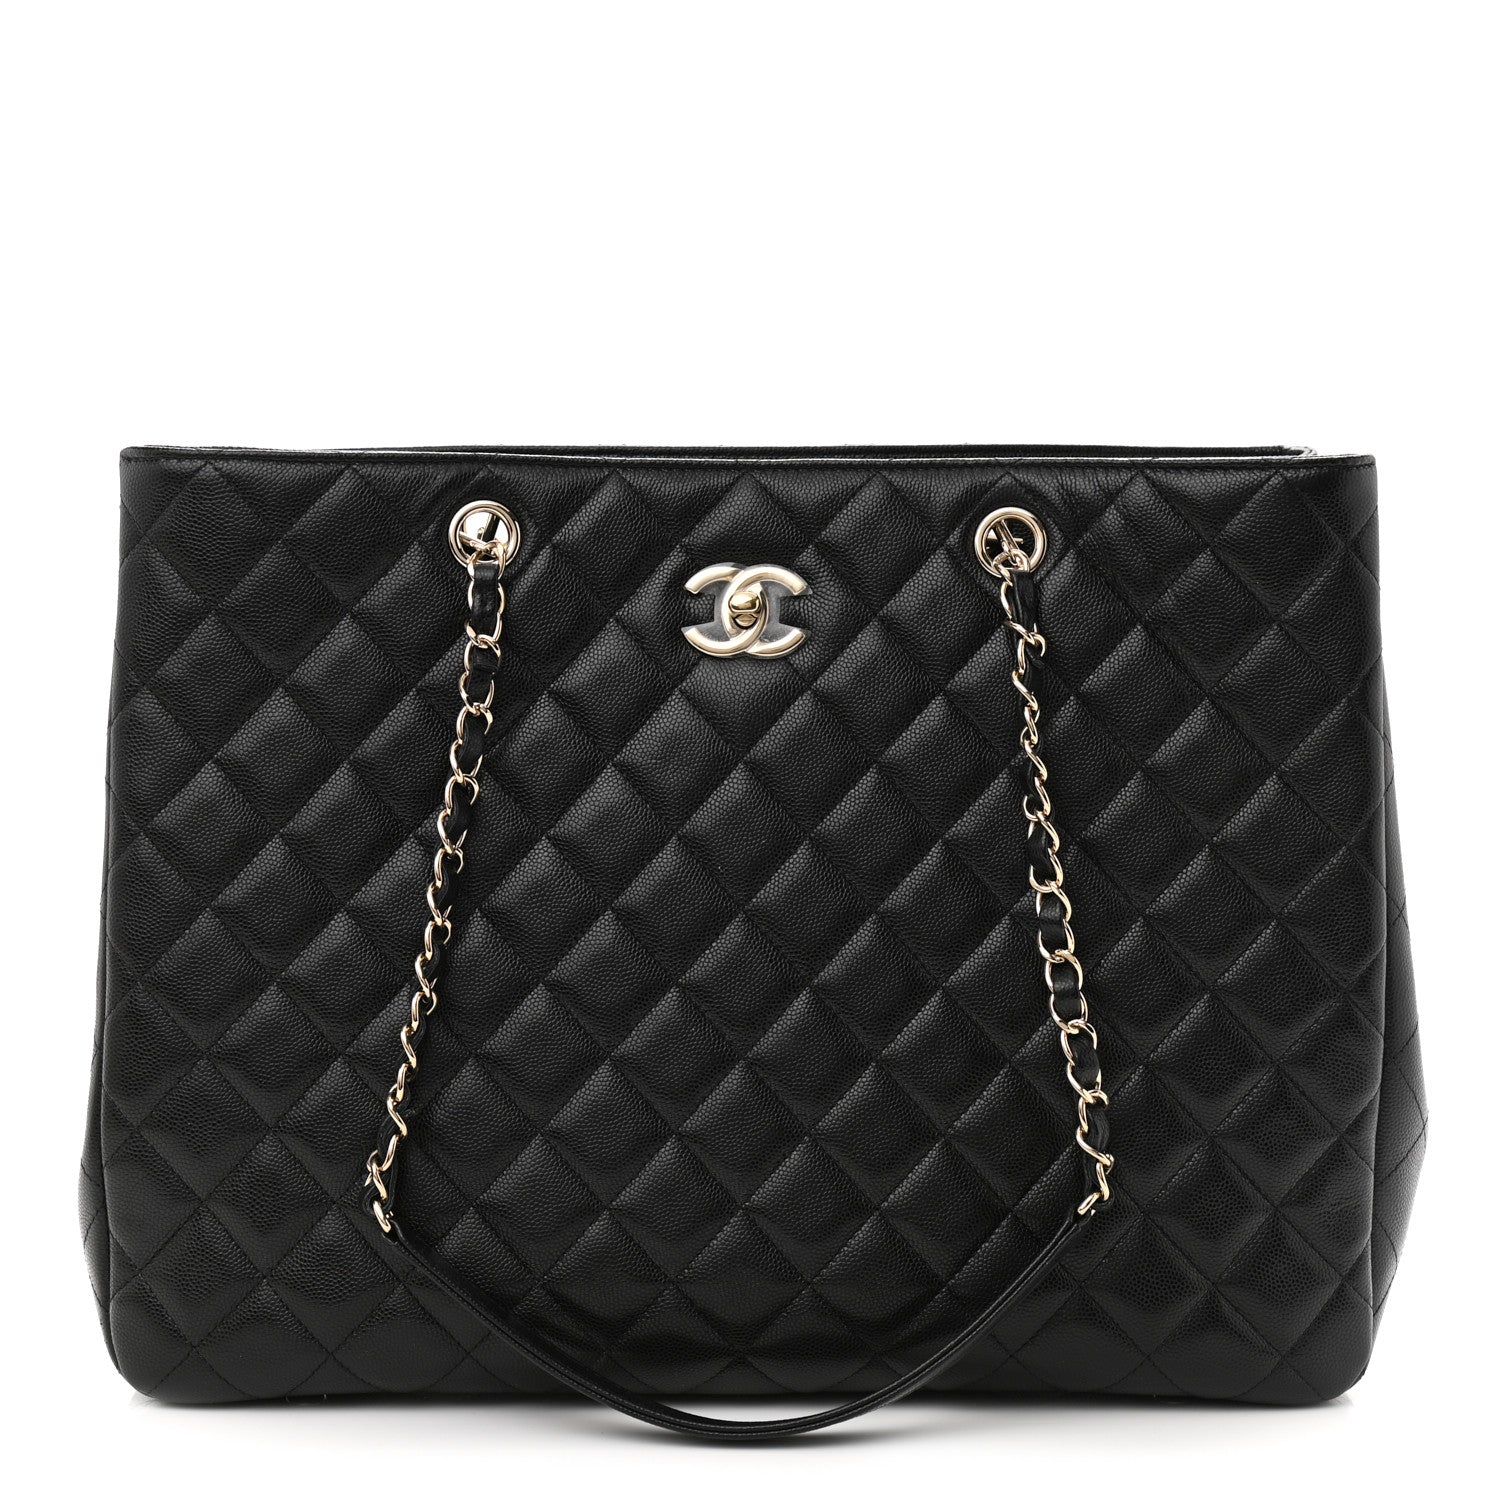 Chanel Black Caviar Leather Large Shopping Tote